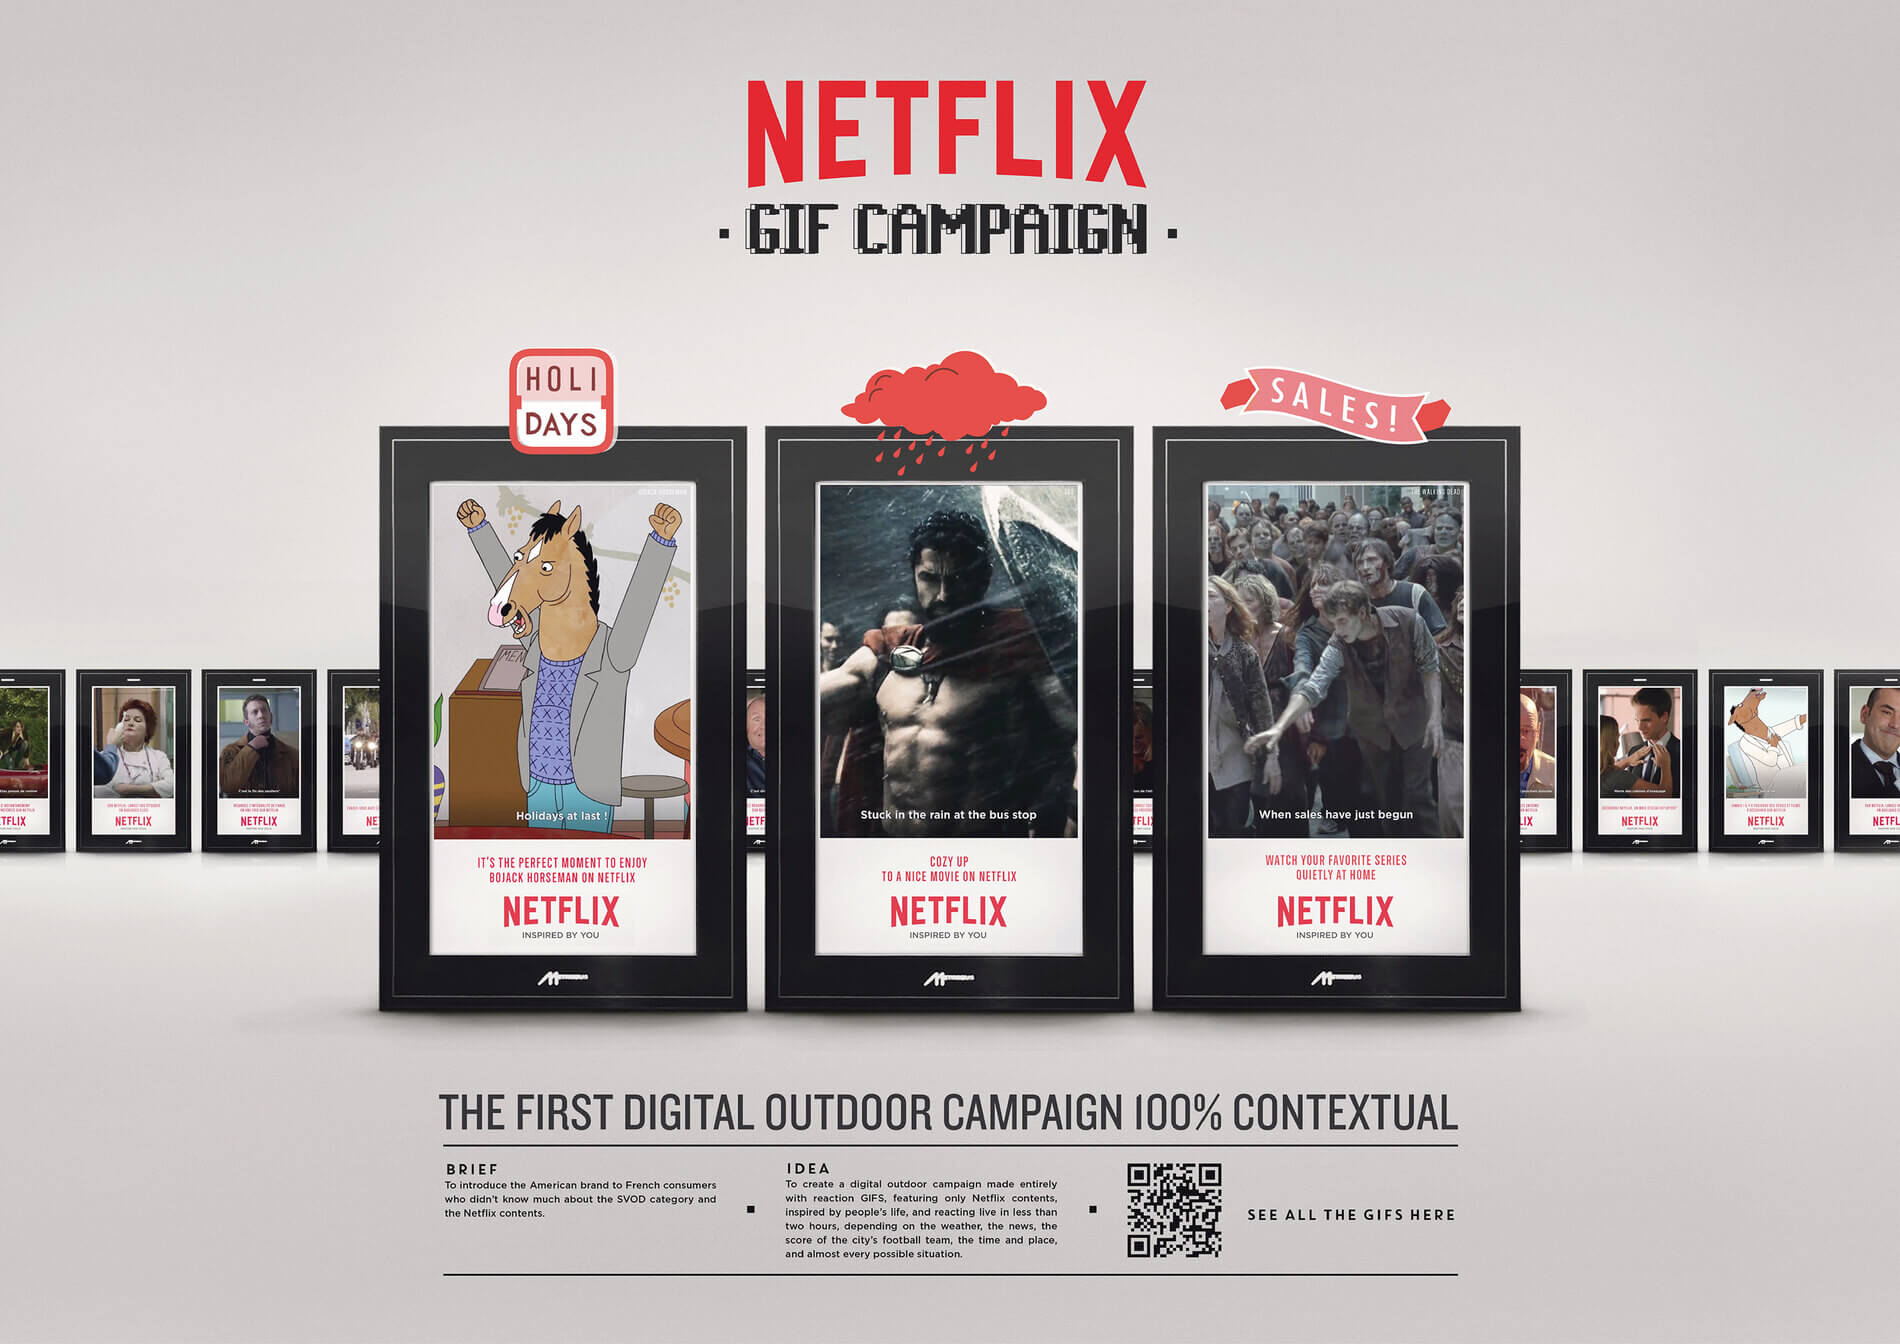 Netflix Gif Campaign comfort fabric conditioners Campaigns of the World®